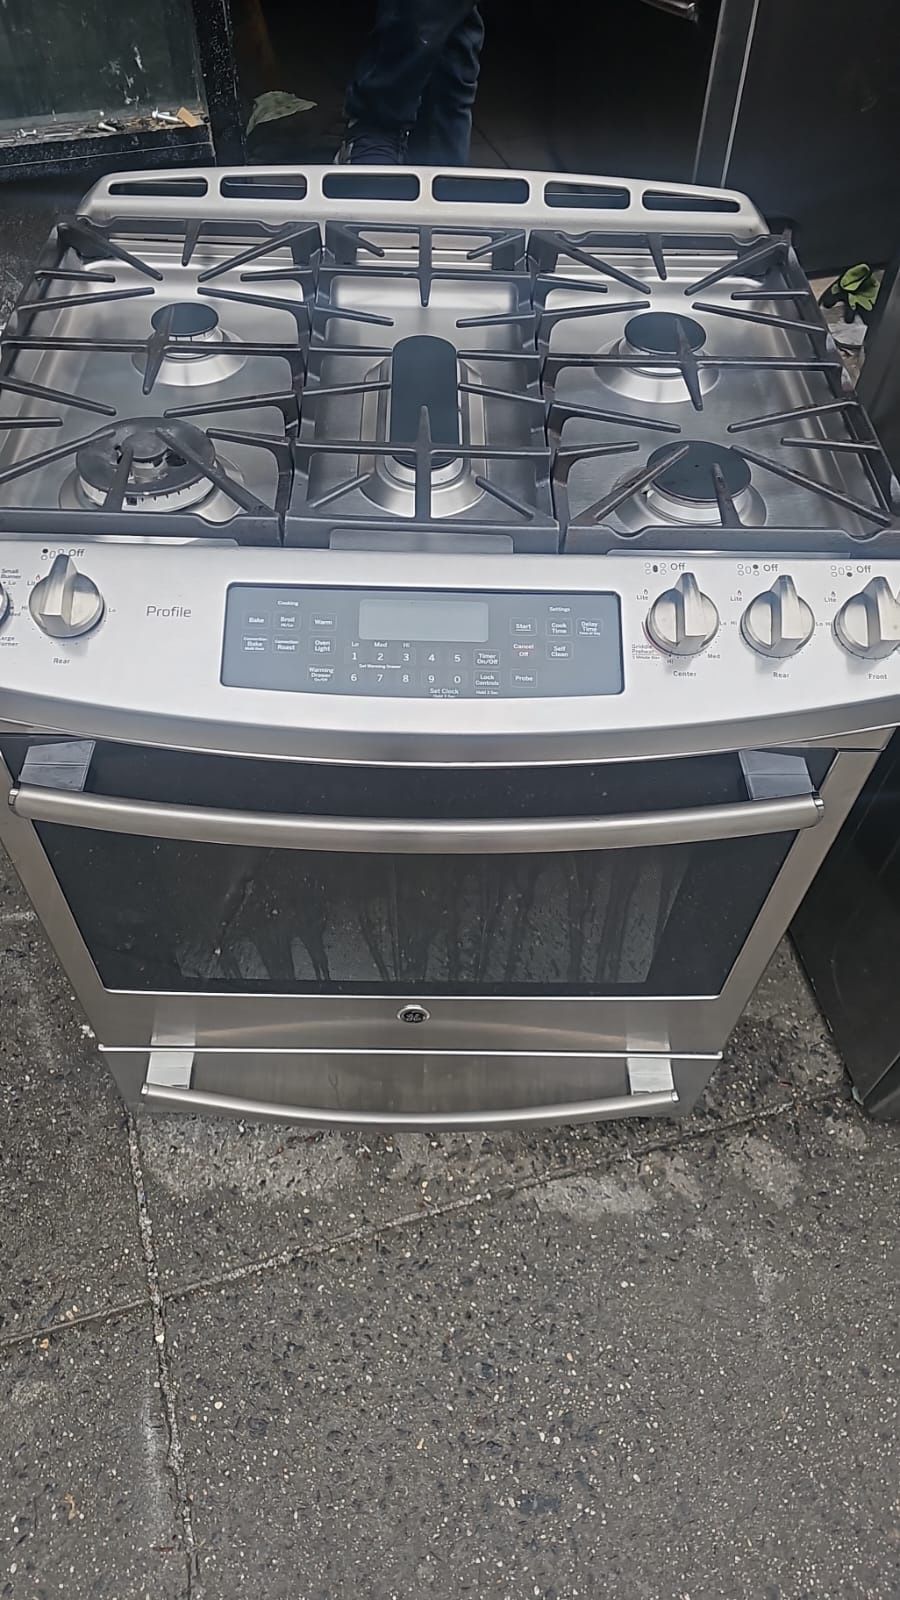 Ge Gas Stove 5 Burners 30 Inches Slid In 